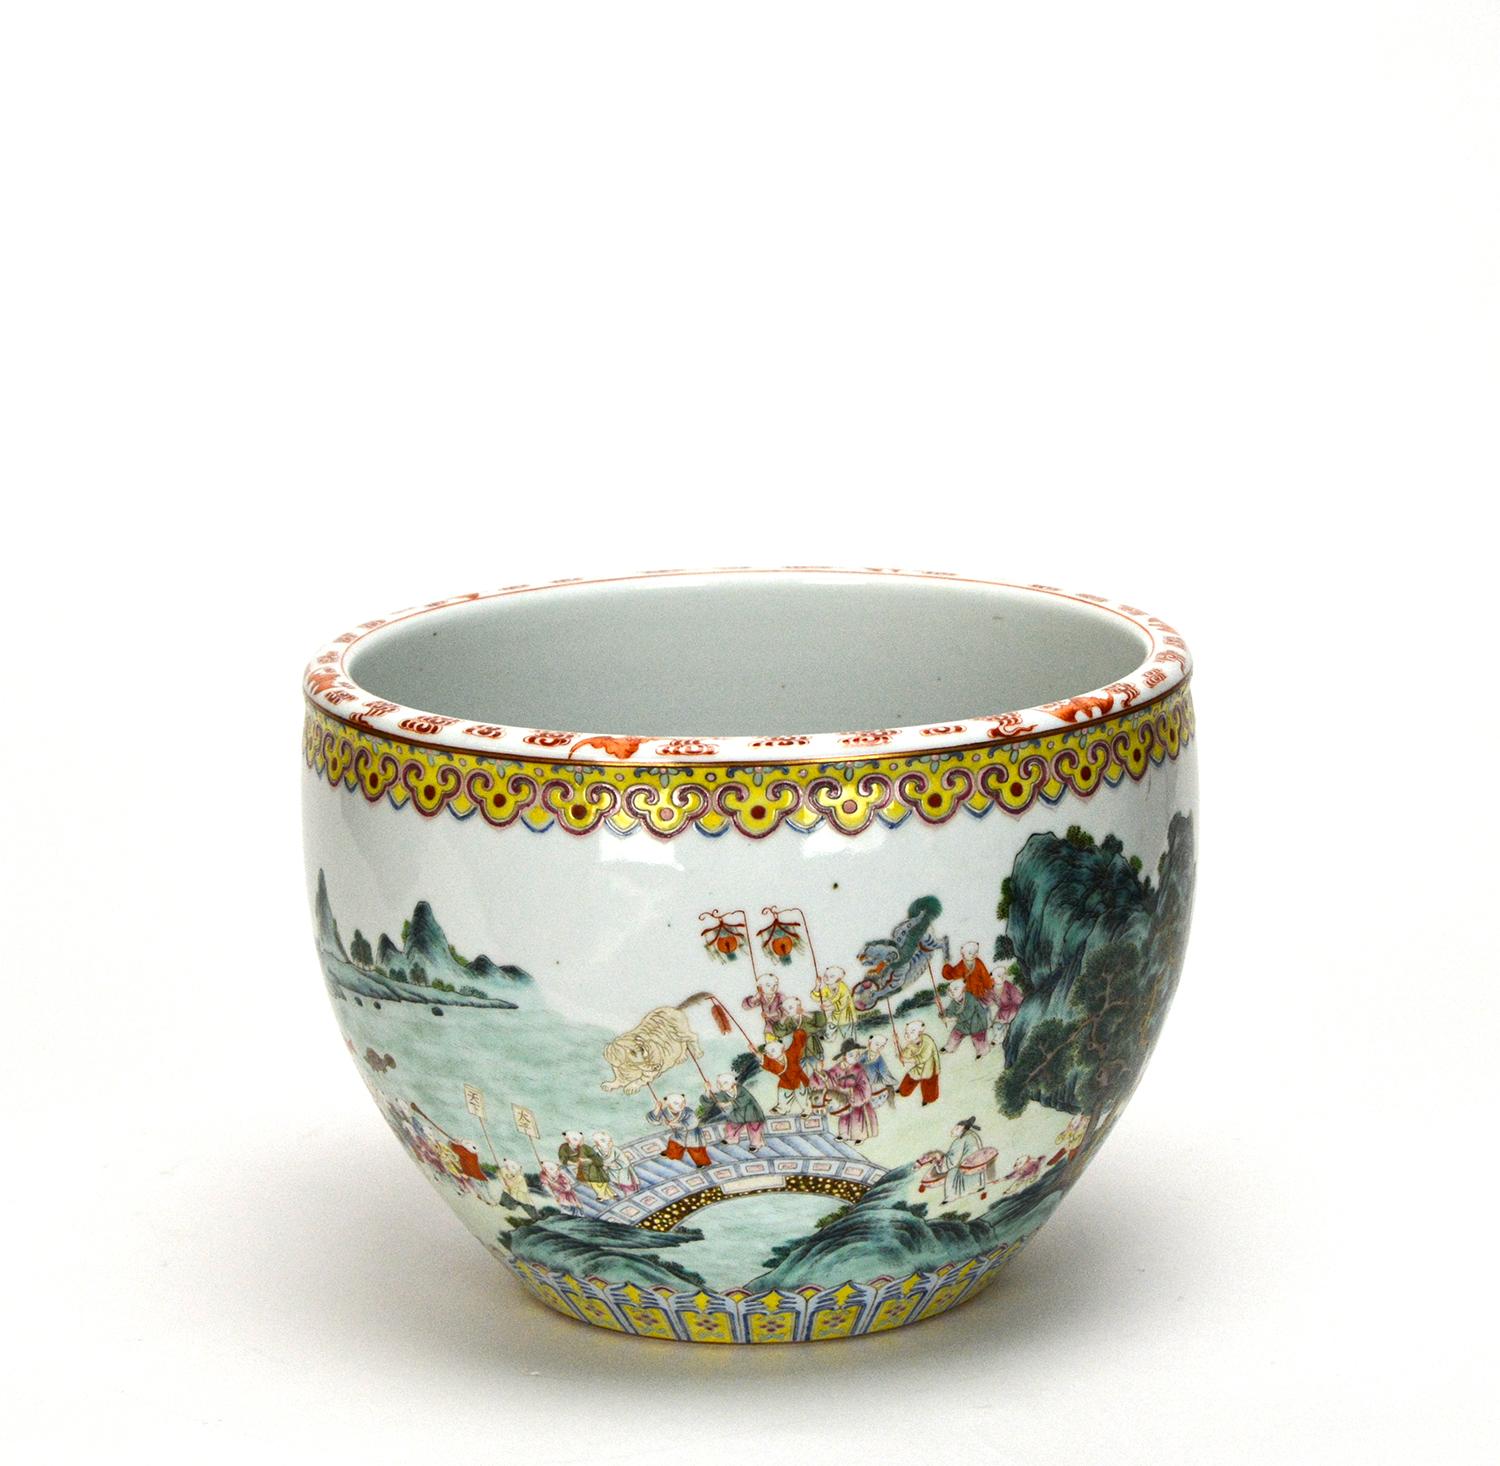 For sale is a nice Chinese Qing Qianlong period Famille Rose porcelain Jardiniere, by superb painting skill, Famille Rose colors, 100 boys in parade with dragon and lantern dance, rich yet settled color painted landscape over creamy white glazed